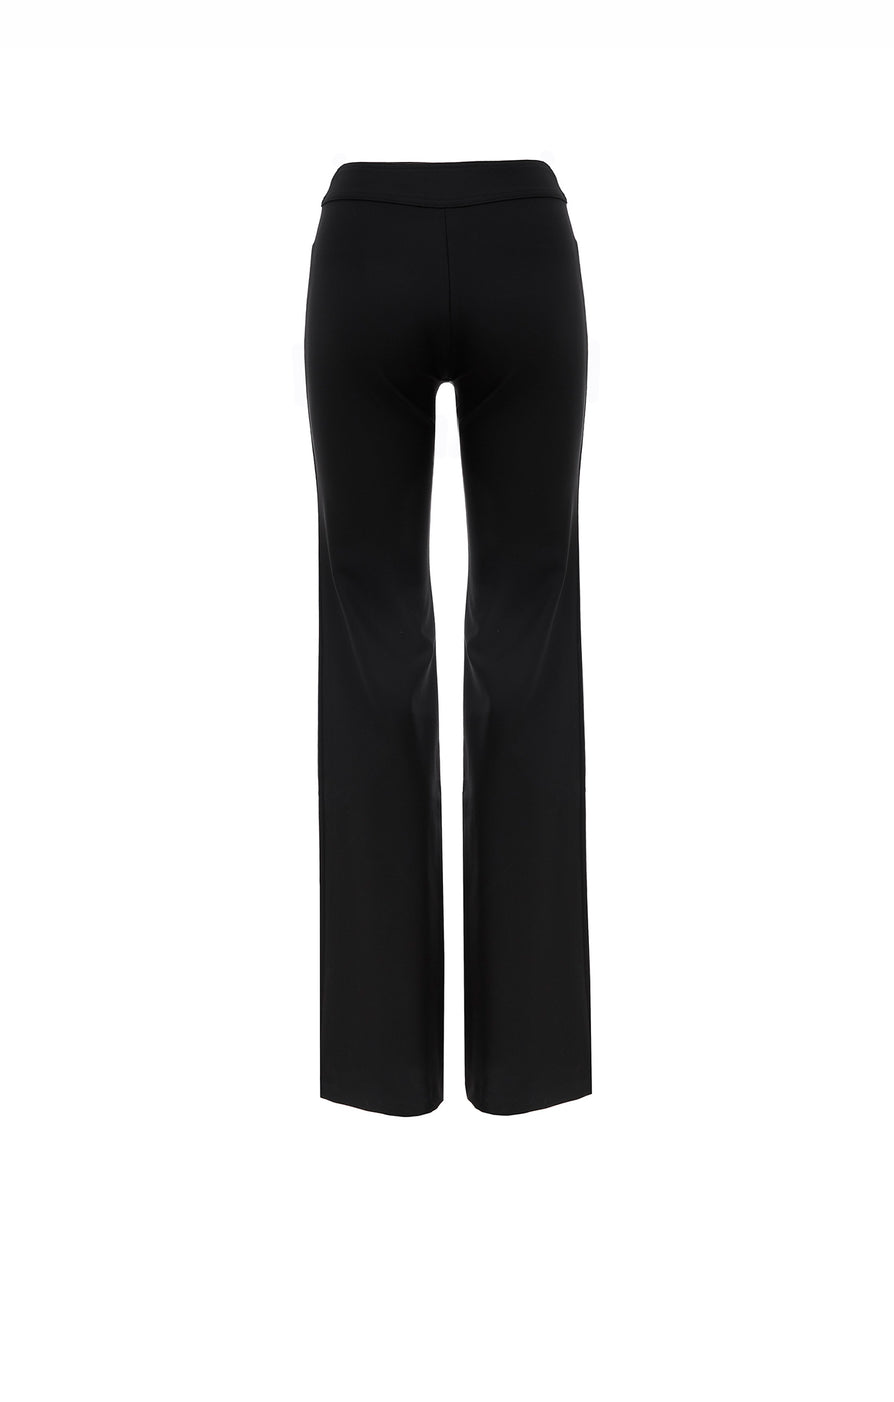 THE GWEN PANT BLACK | ghost